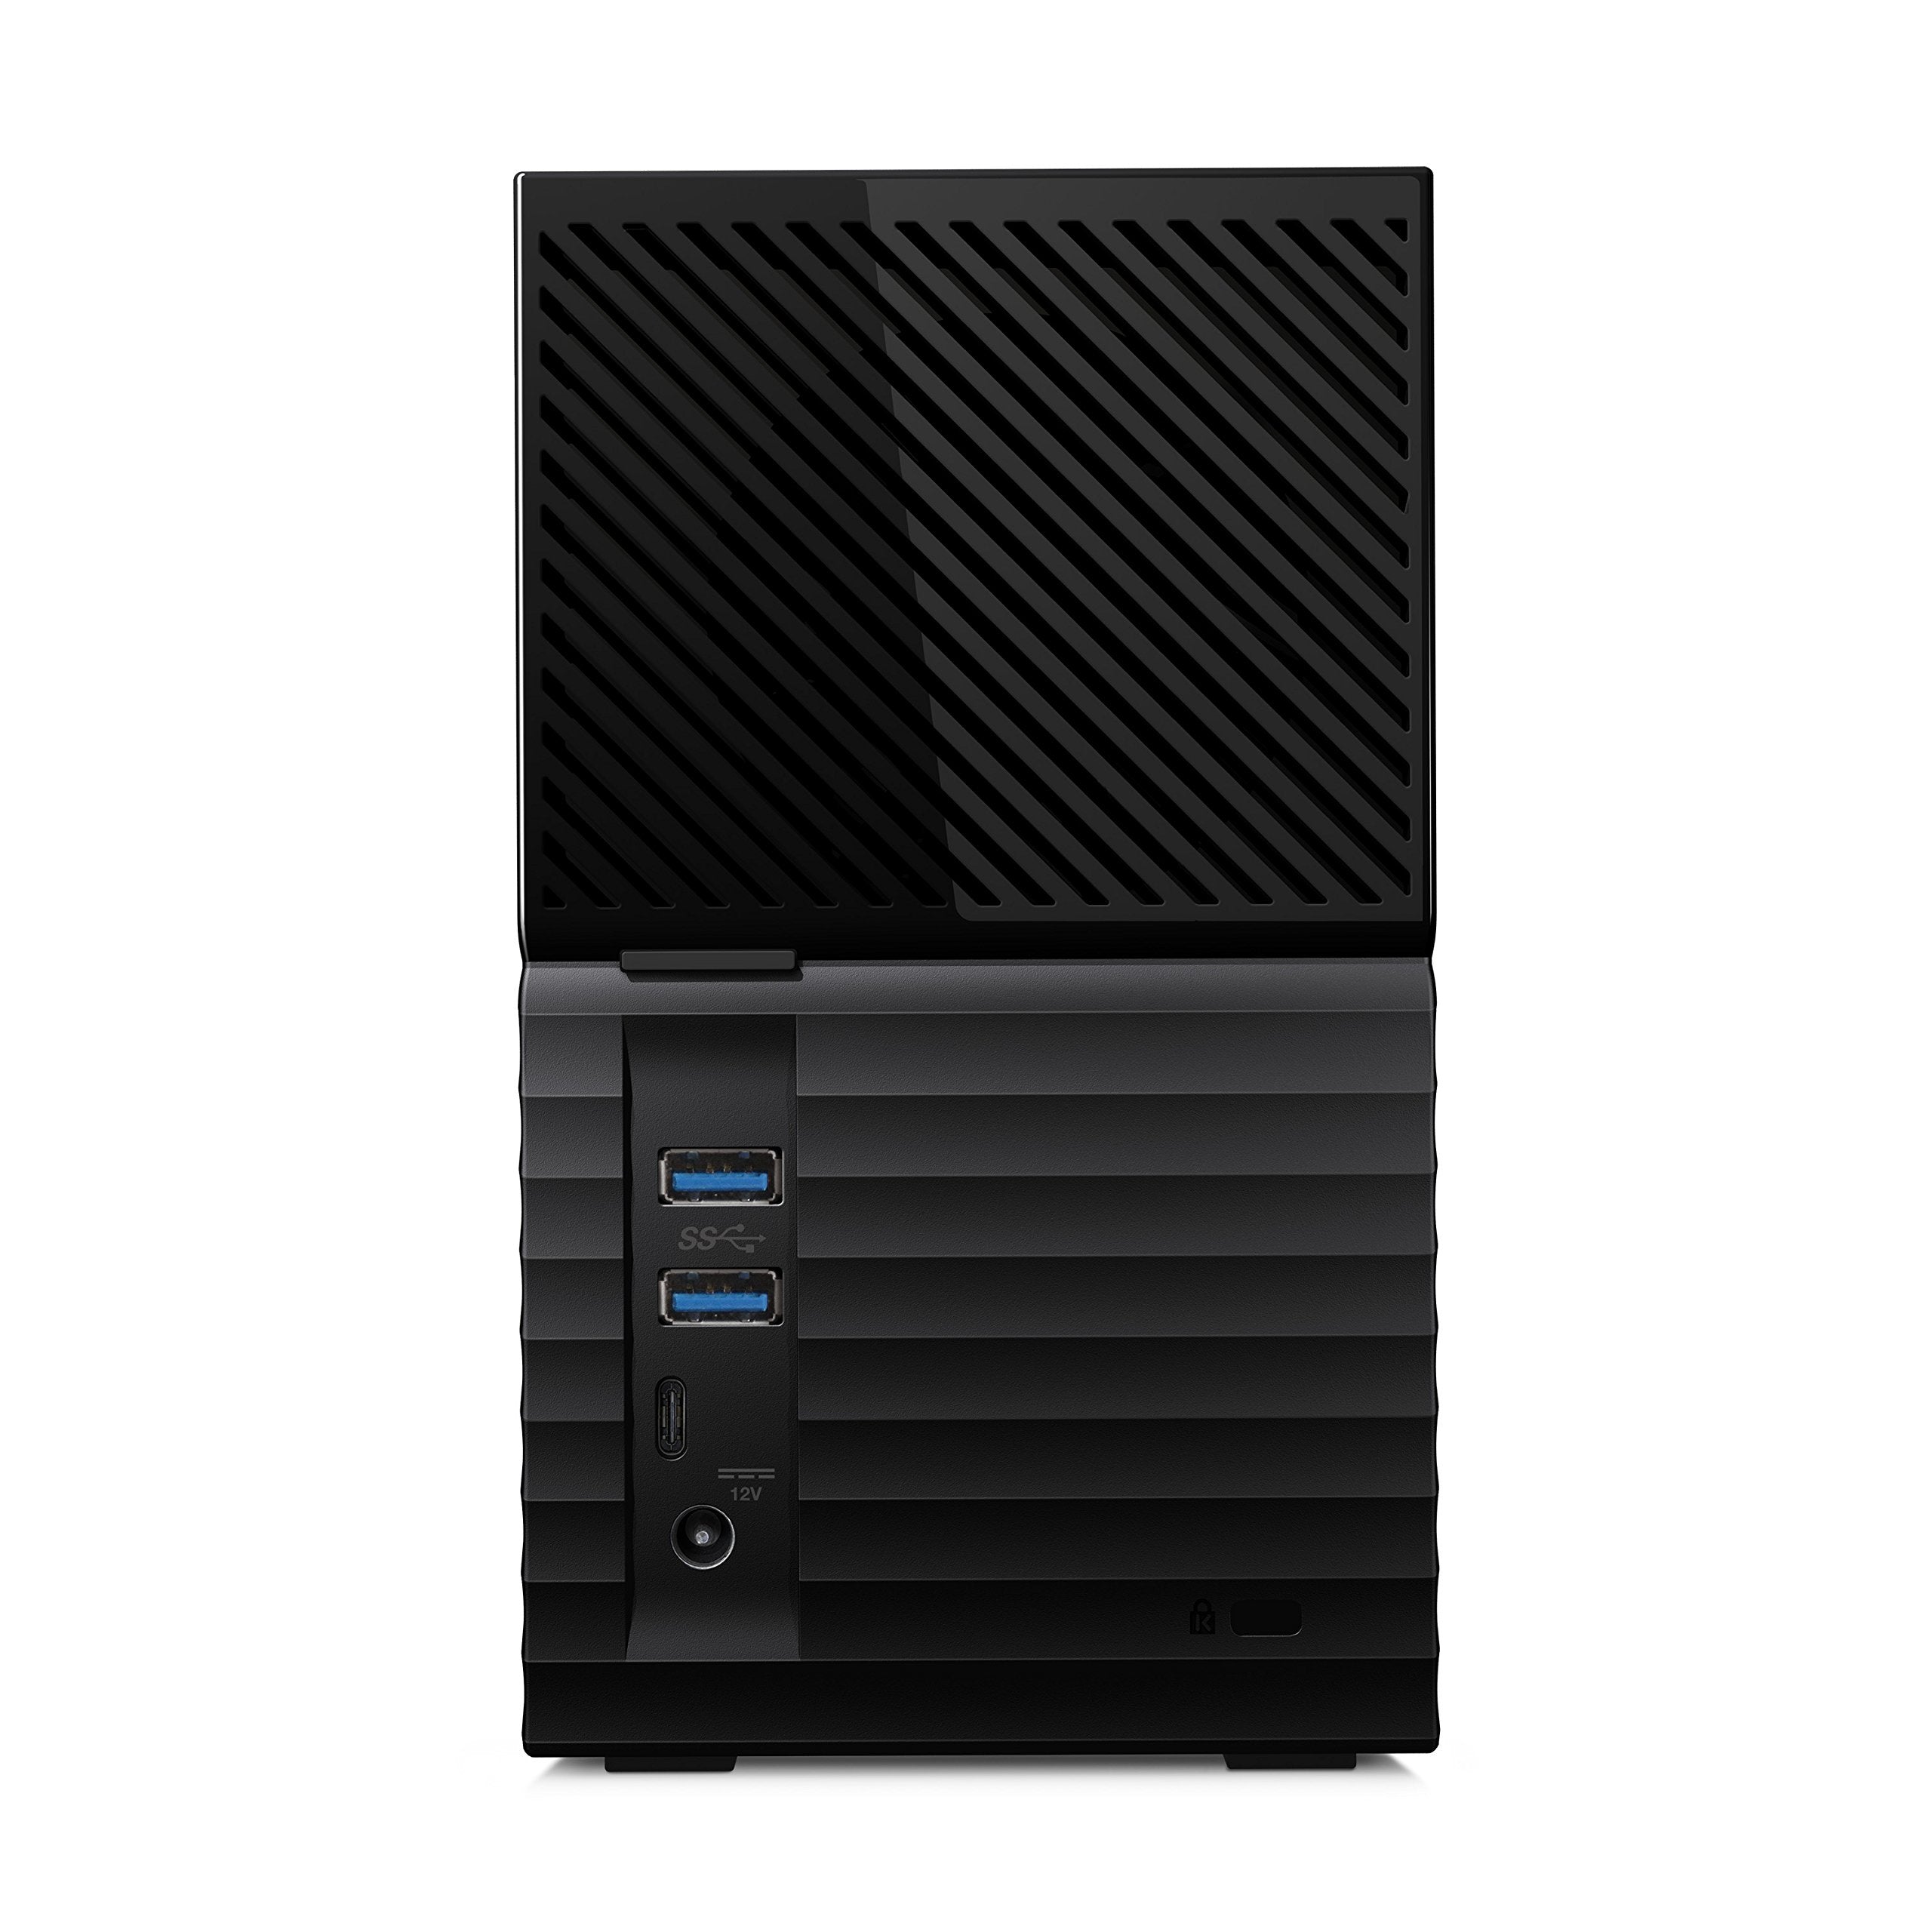 WD 36TB My Book Duo Desktop HDD USB 3.1 Gen 1 with software for device management, backup and password protection USB-C and USB-A cables RAID 0/1, JBOD